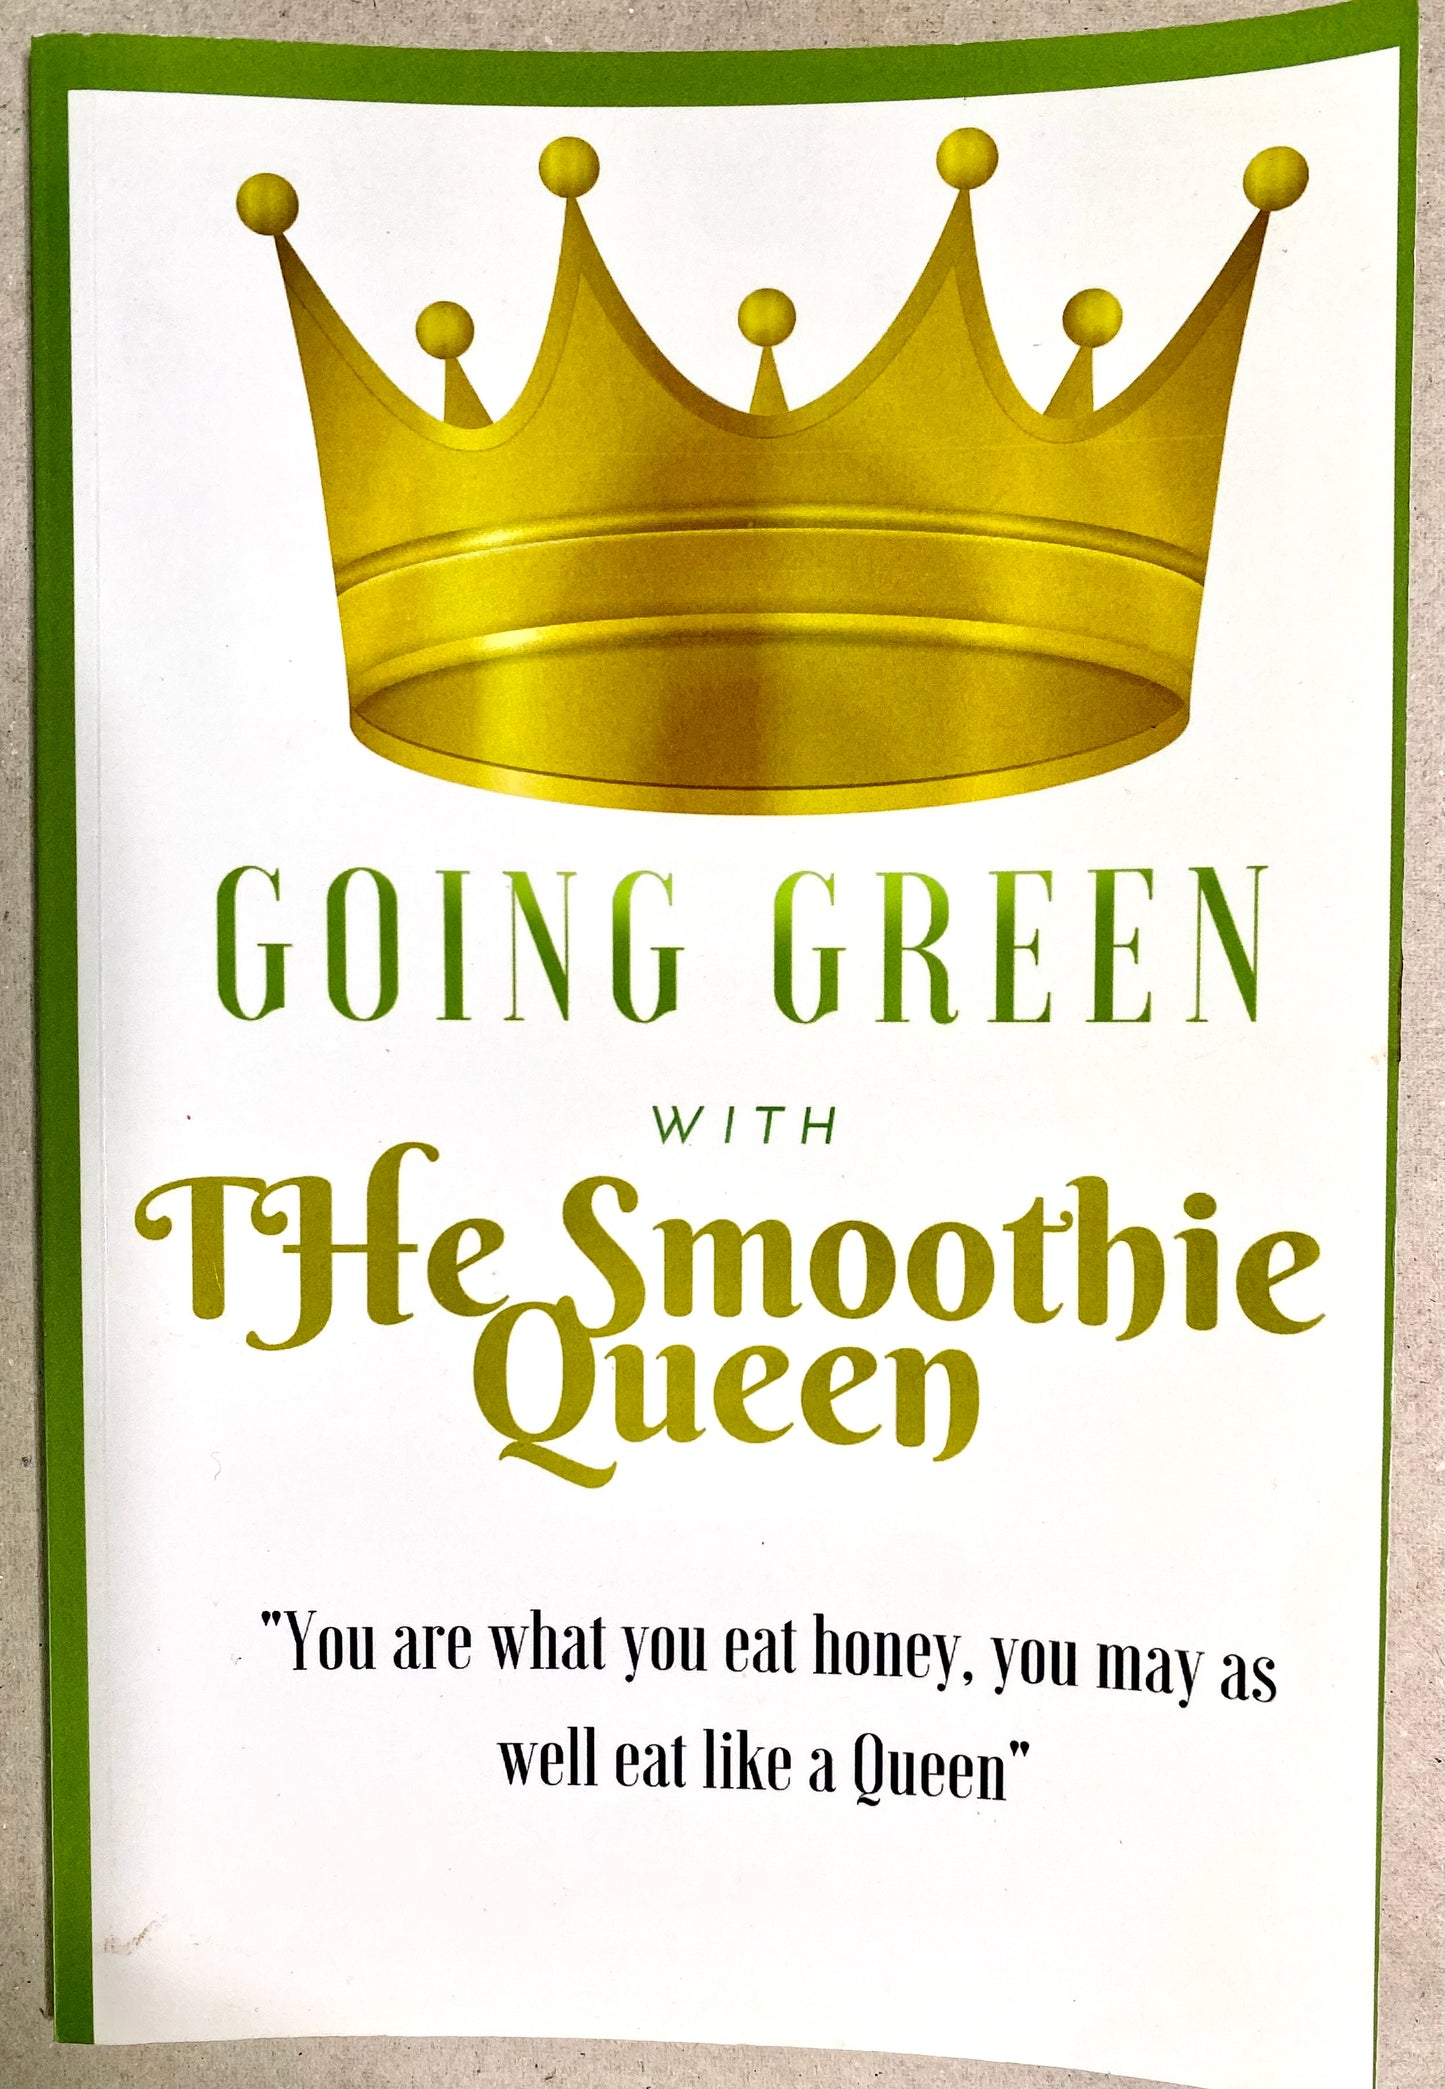 Going green with the smoothie queen- Recipe book